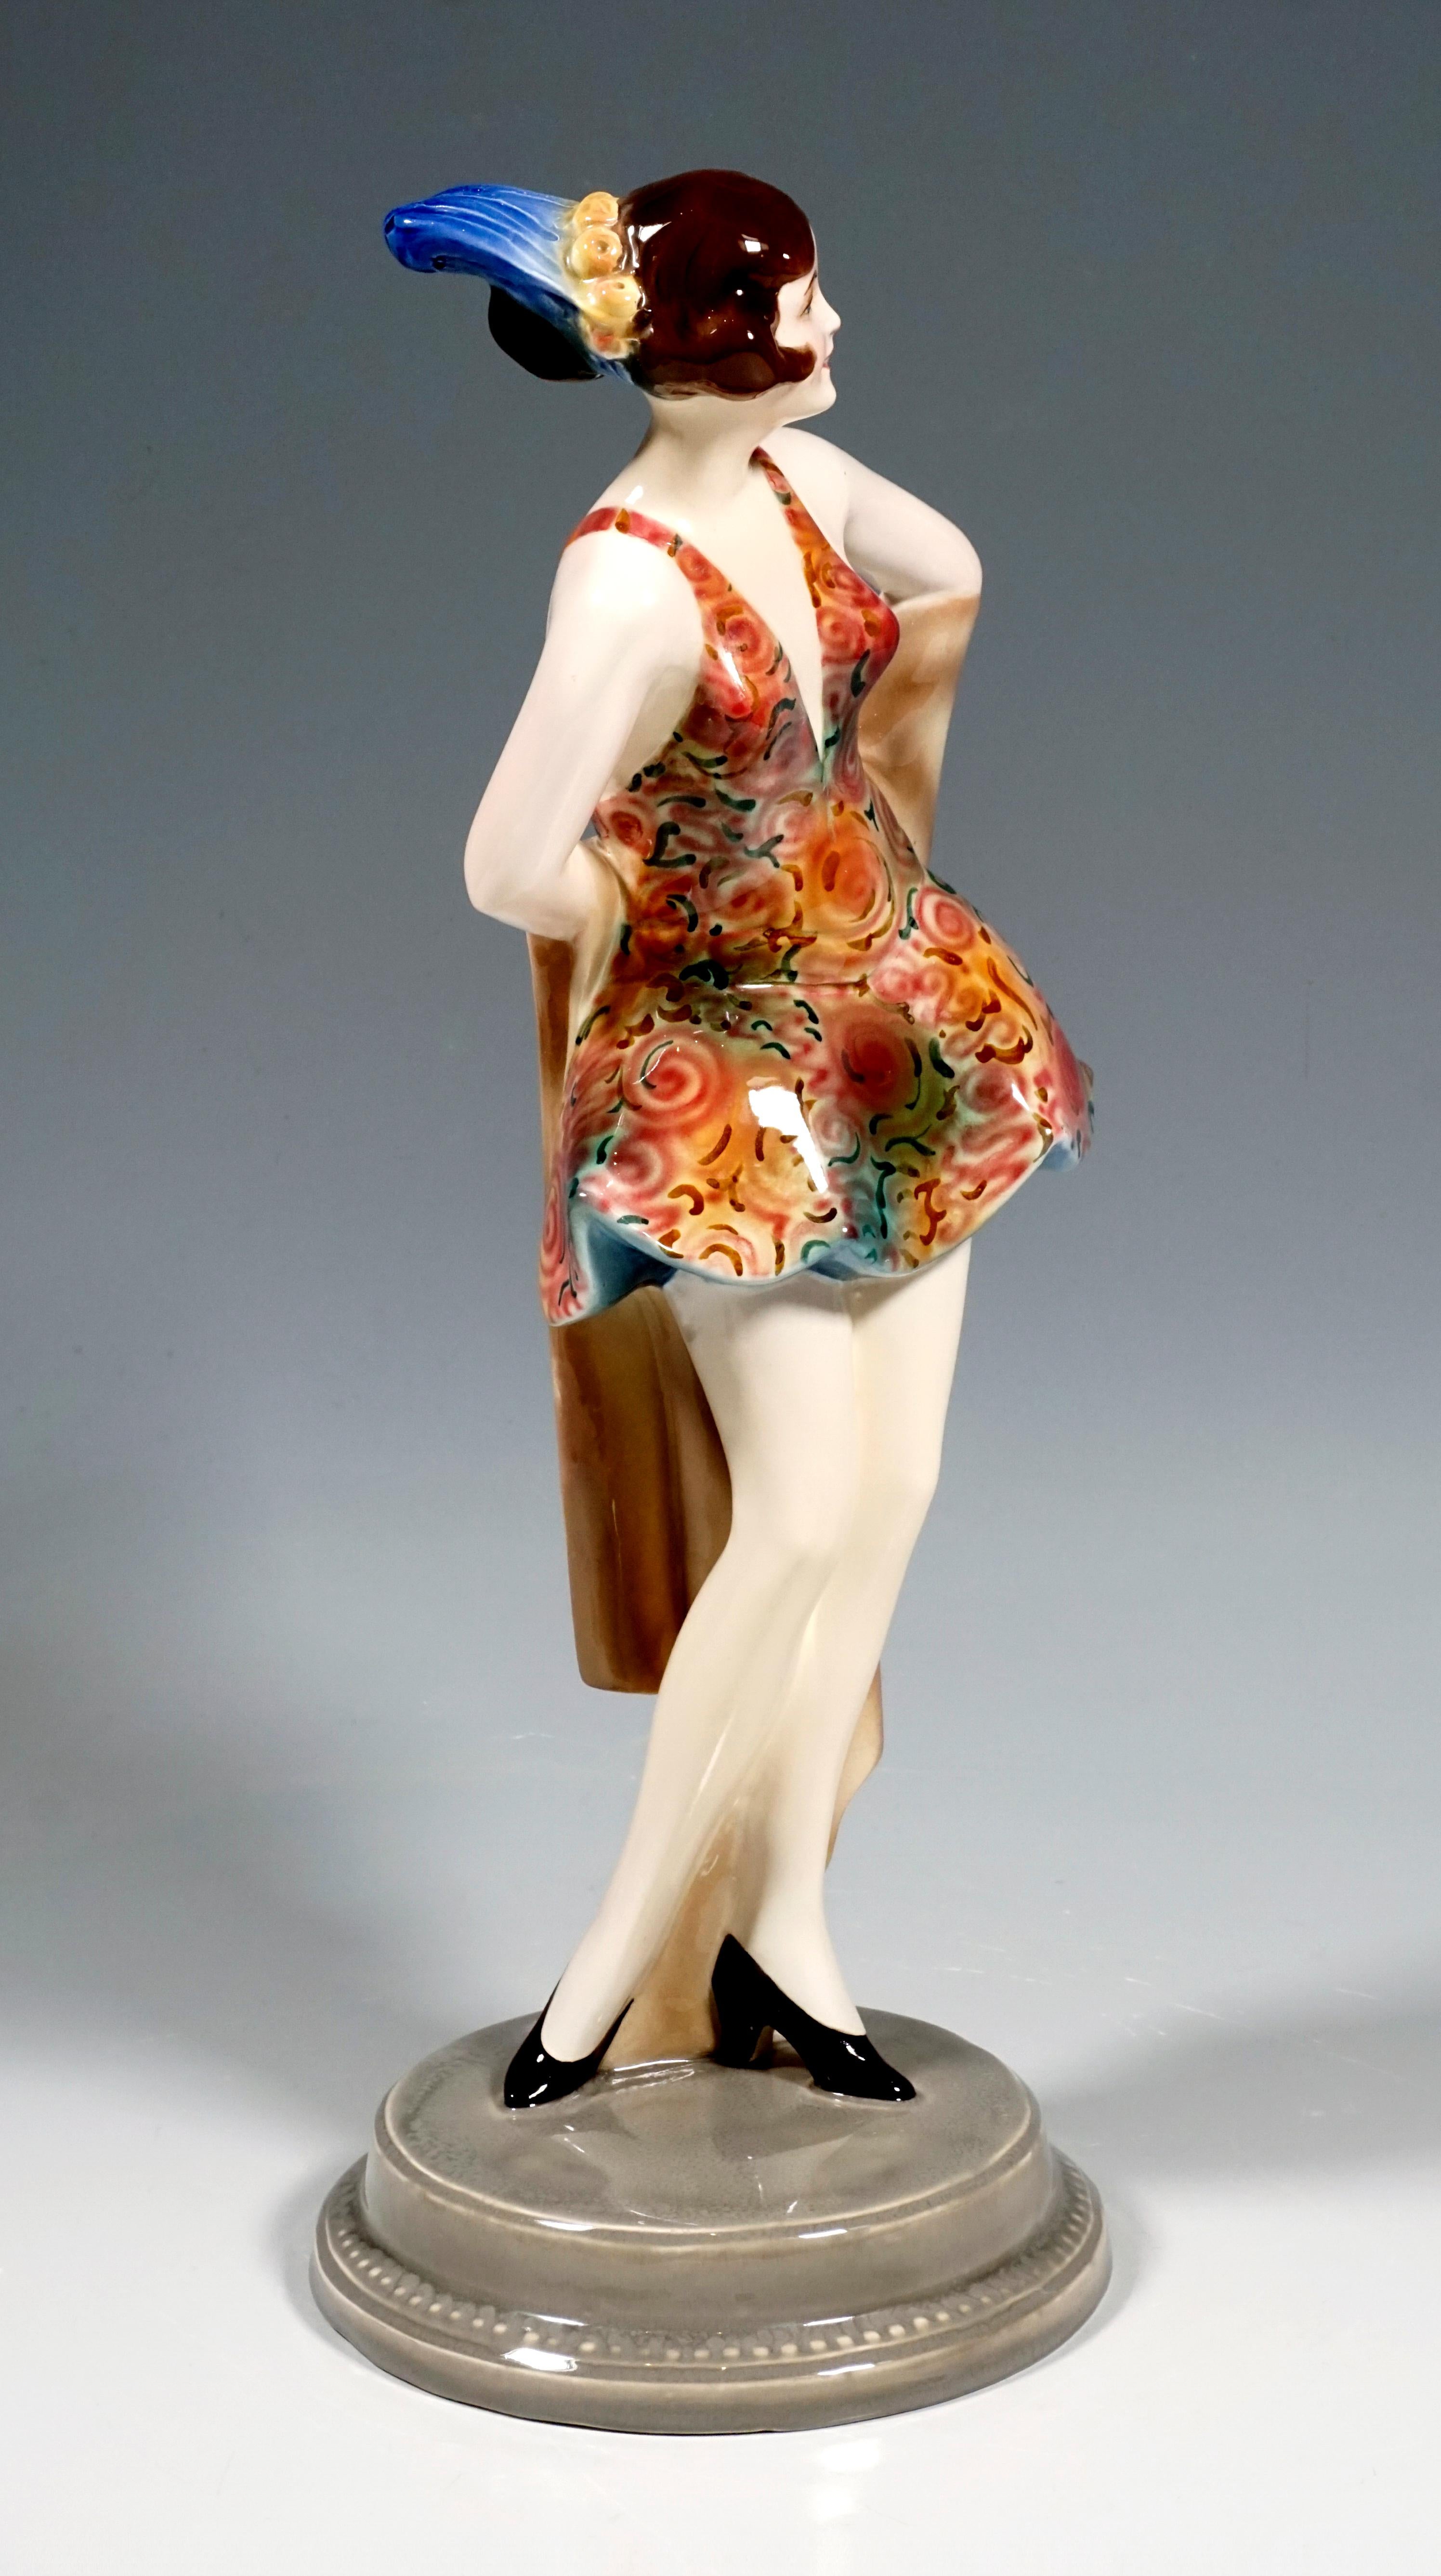 Rare Art Déco Goldscheider Ceramics figurine
The dancer wears a dance dress in red-brown tones cut low at the front and back with a wide, short skirt, with a pattern of stylized flowers. Her brown hair is pinned up with a flower ring and feather